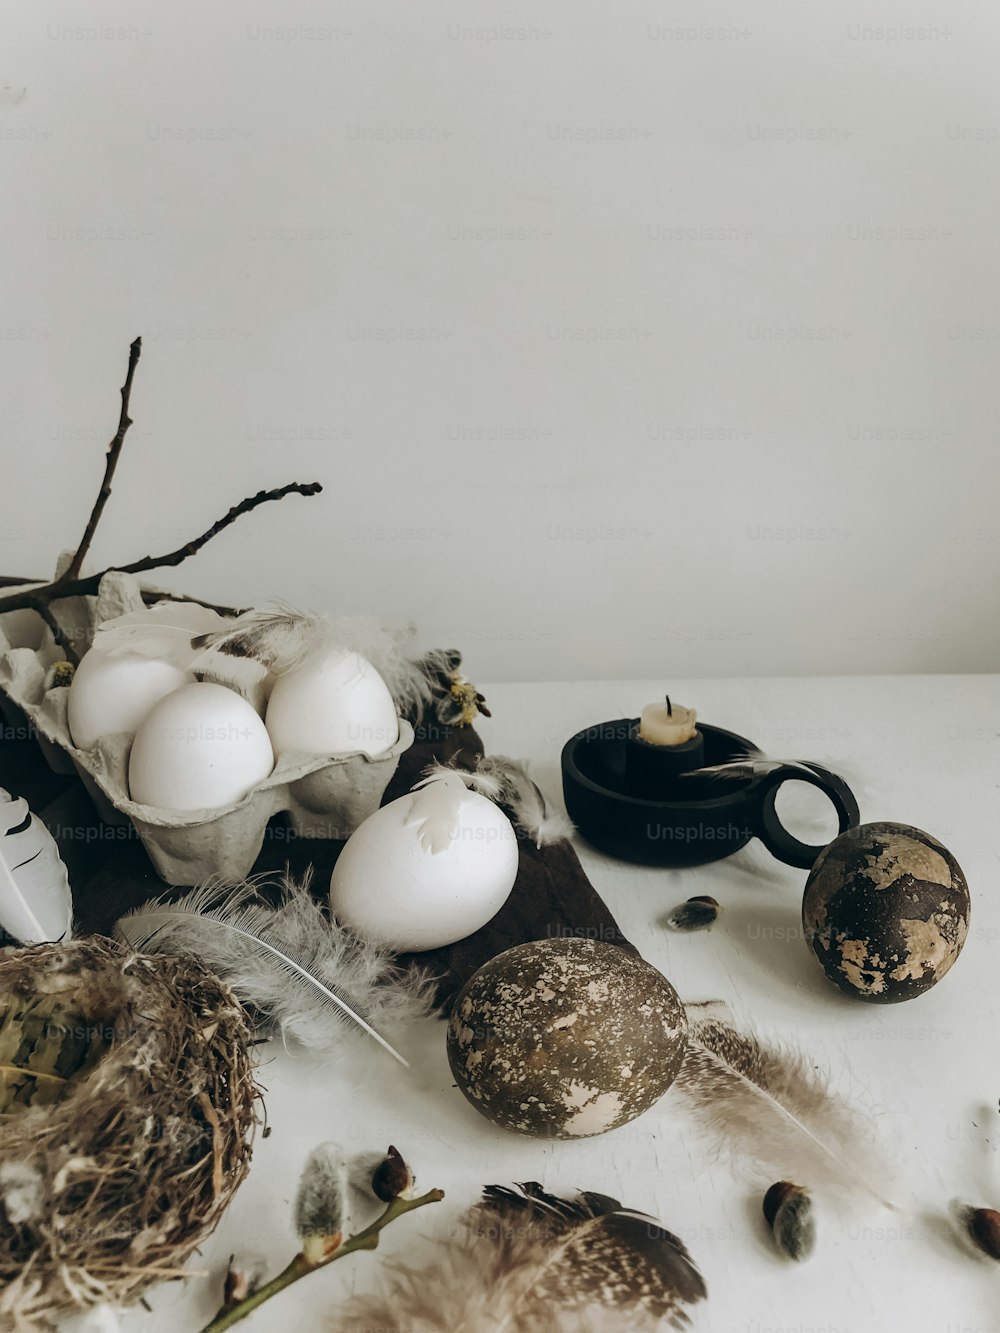 Natural easter eggs, feathers, pussy willow branches, nest and candle on rustic cloth on white aged table. Stylish rural Easter still life. Modern simple aesthetics,  white and grey colors